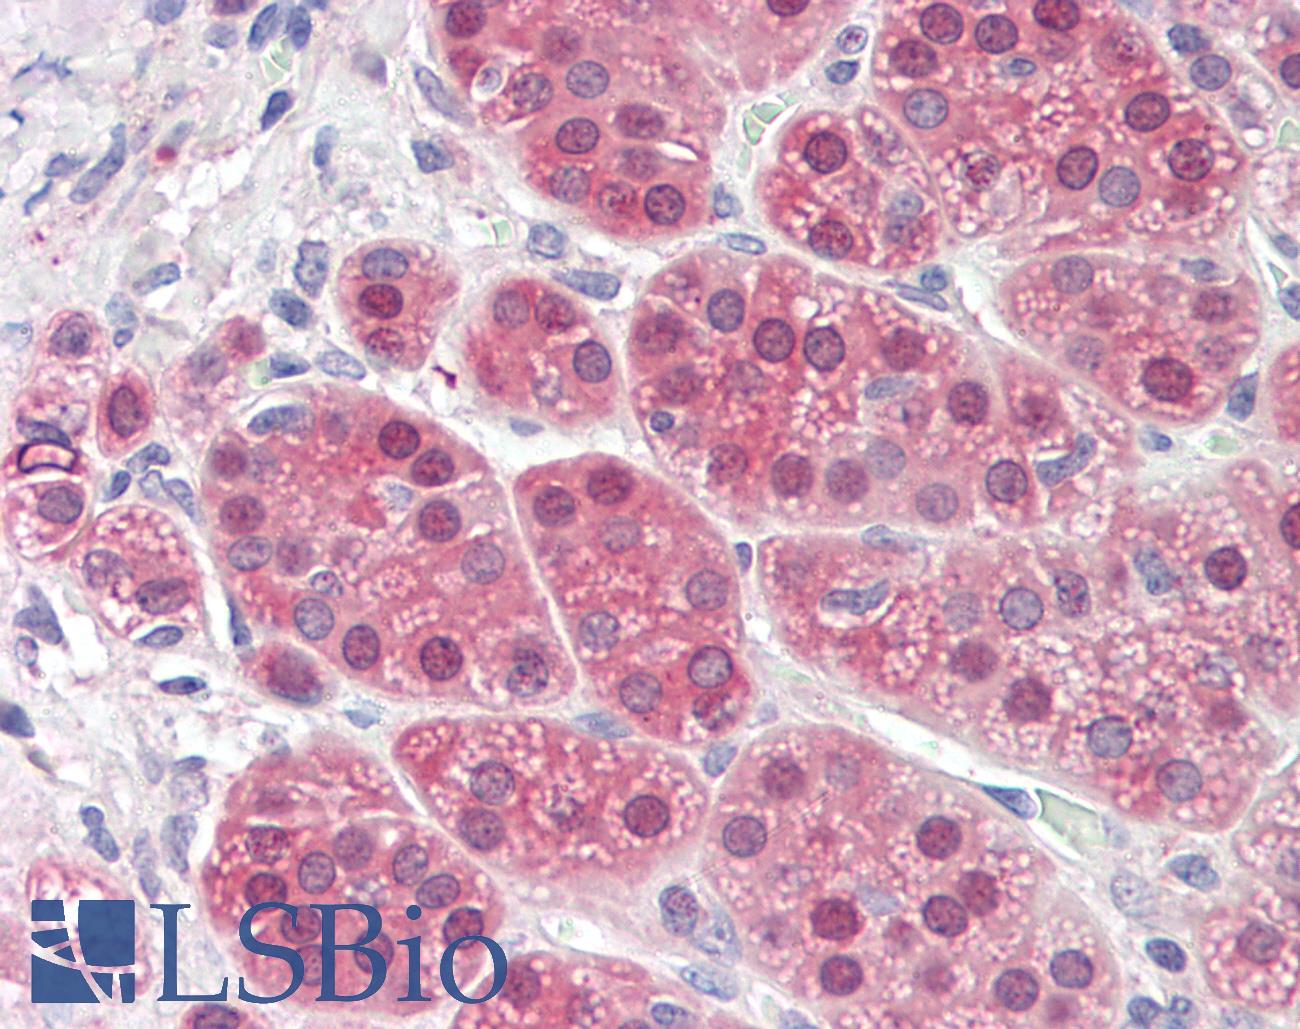 MS / MTR Antibody - Anti-MS / MTR antibody IHC staining of human adrenal. Immunohistochemistry of formalin-fixed, paraffin-embedded tissue after heat-induced antigen retrieval.